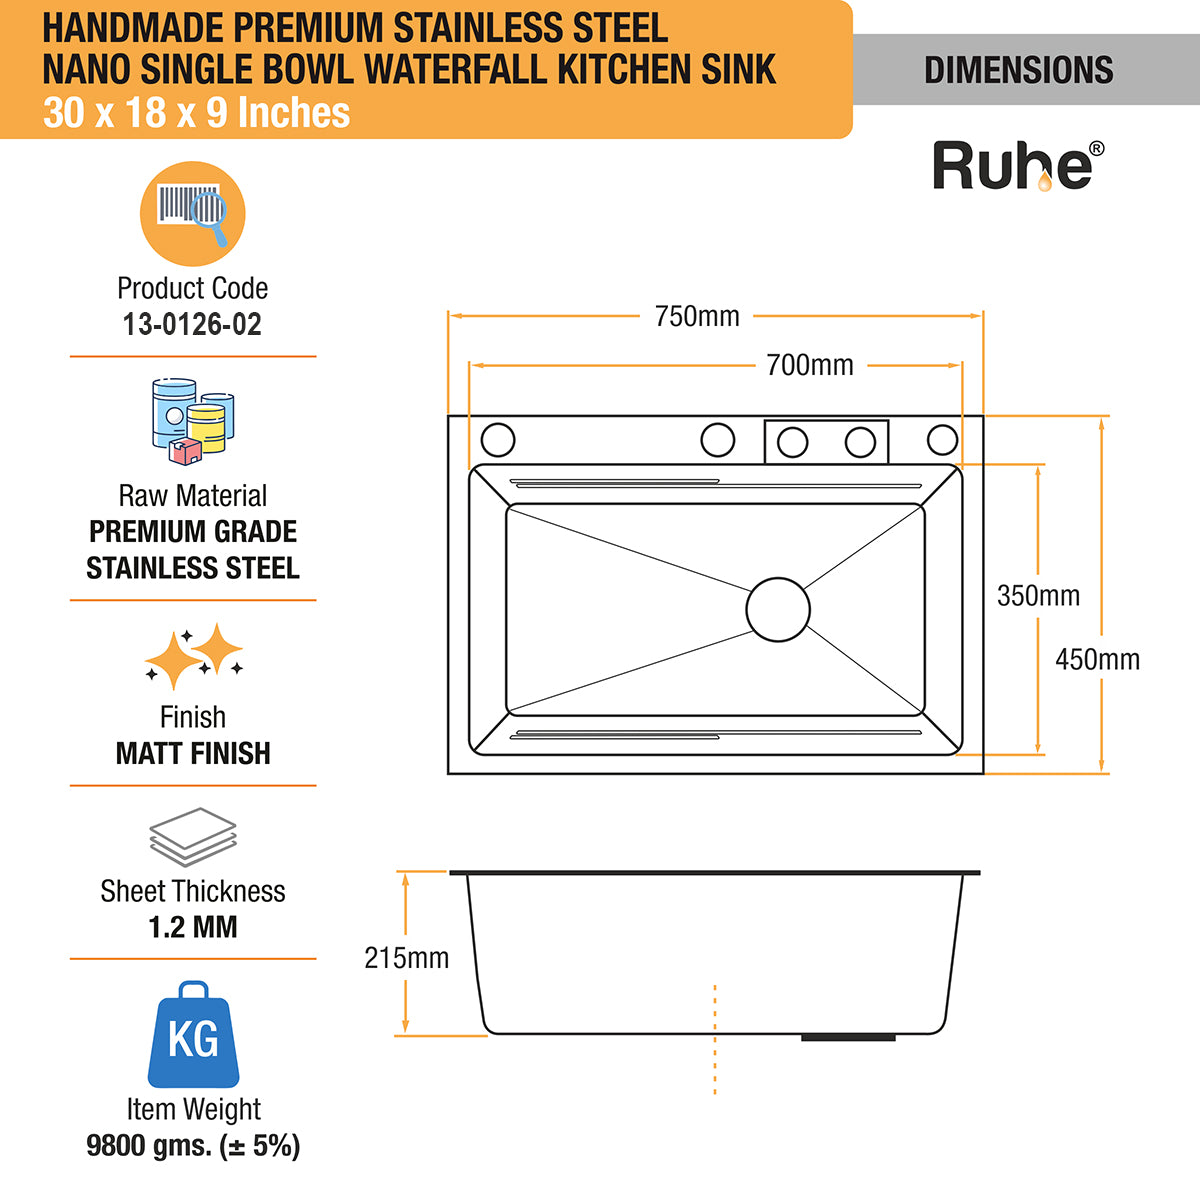 Handmade Premium Nano Kitchen Sink with Integrated Waterfall, Pull-Out & RO Faucet (30 x 18 x 9 Inches) - by Ruhe®